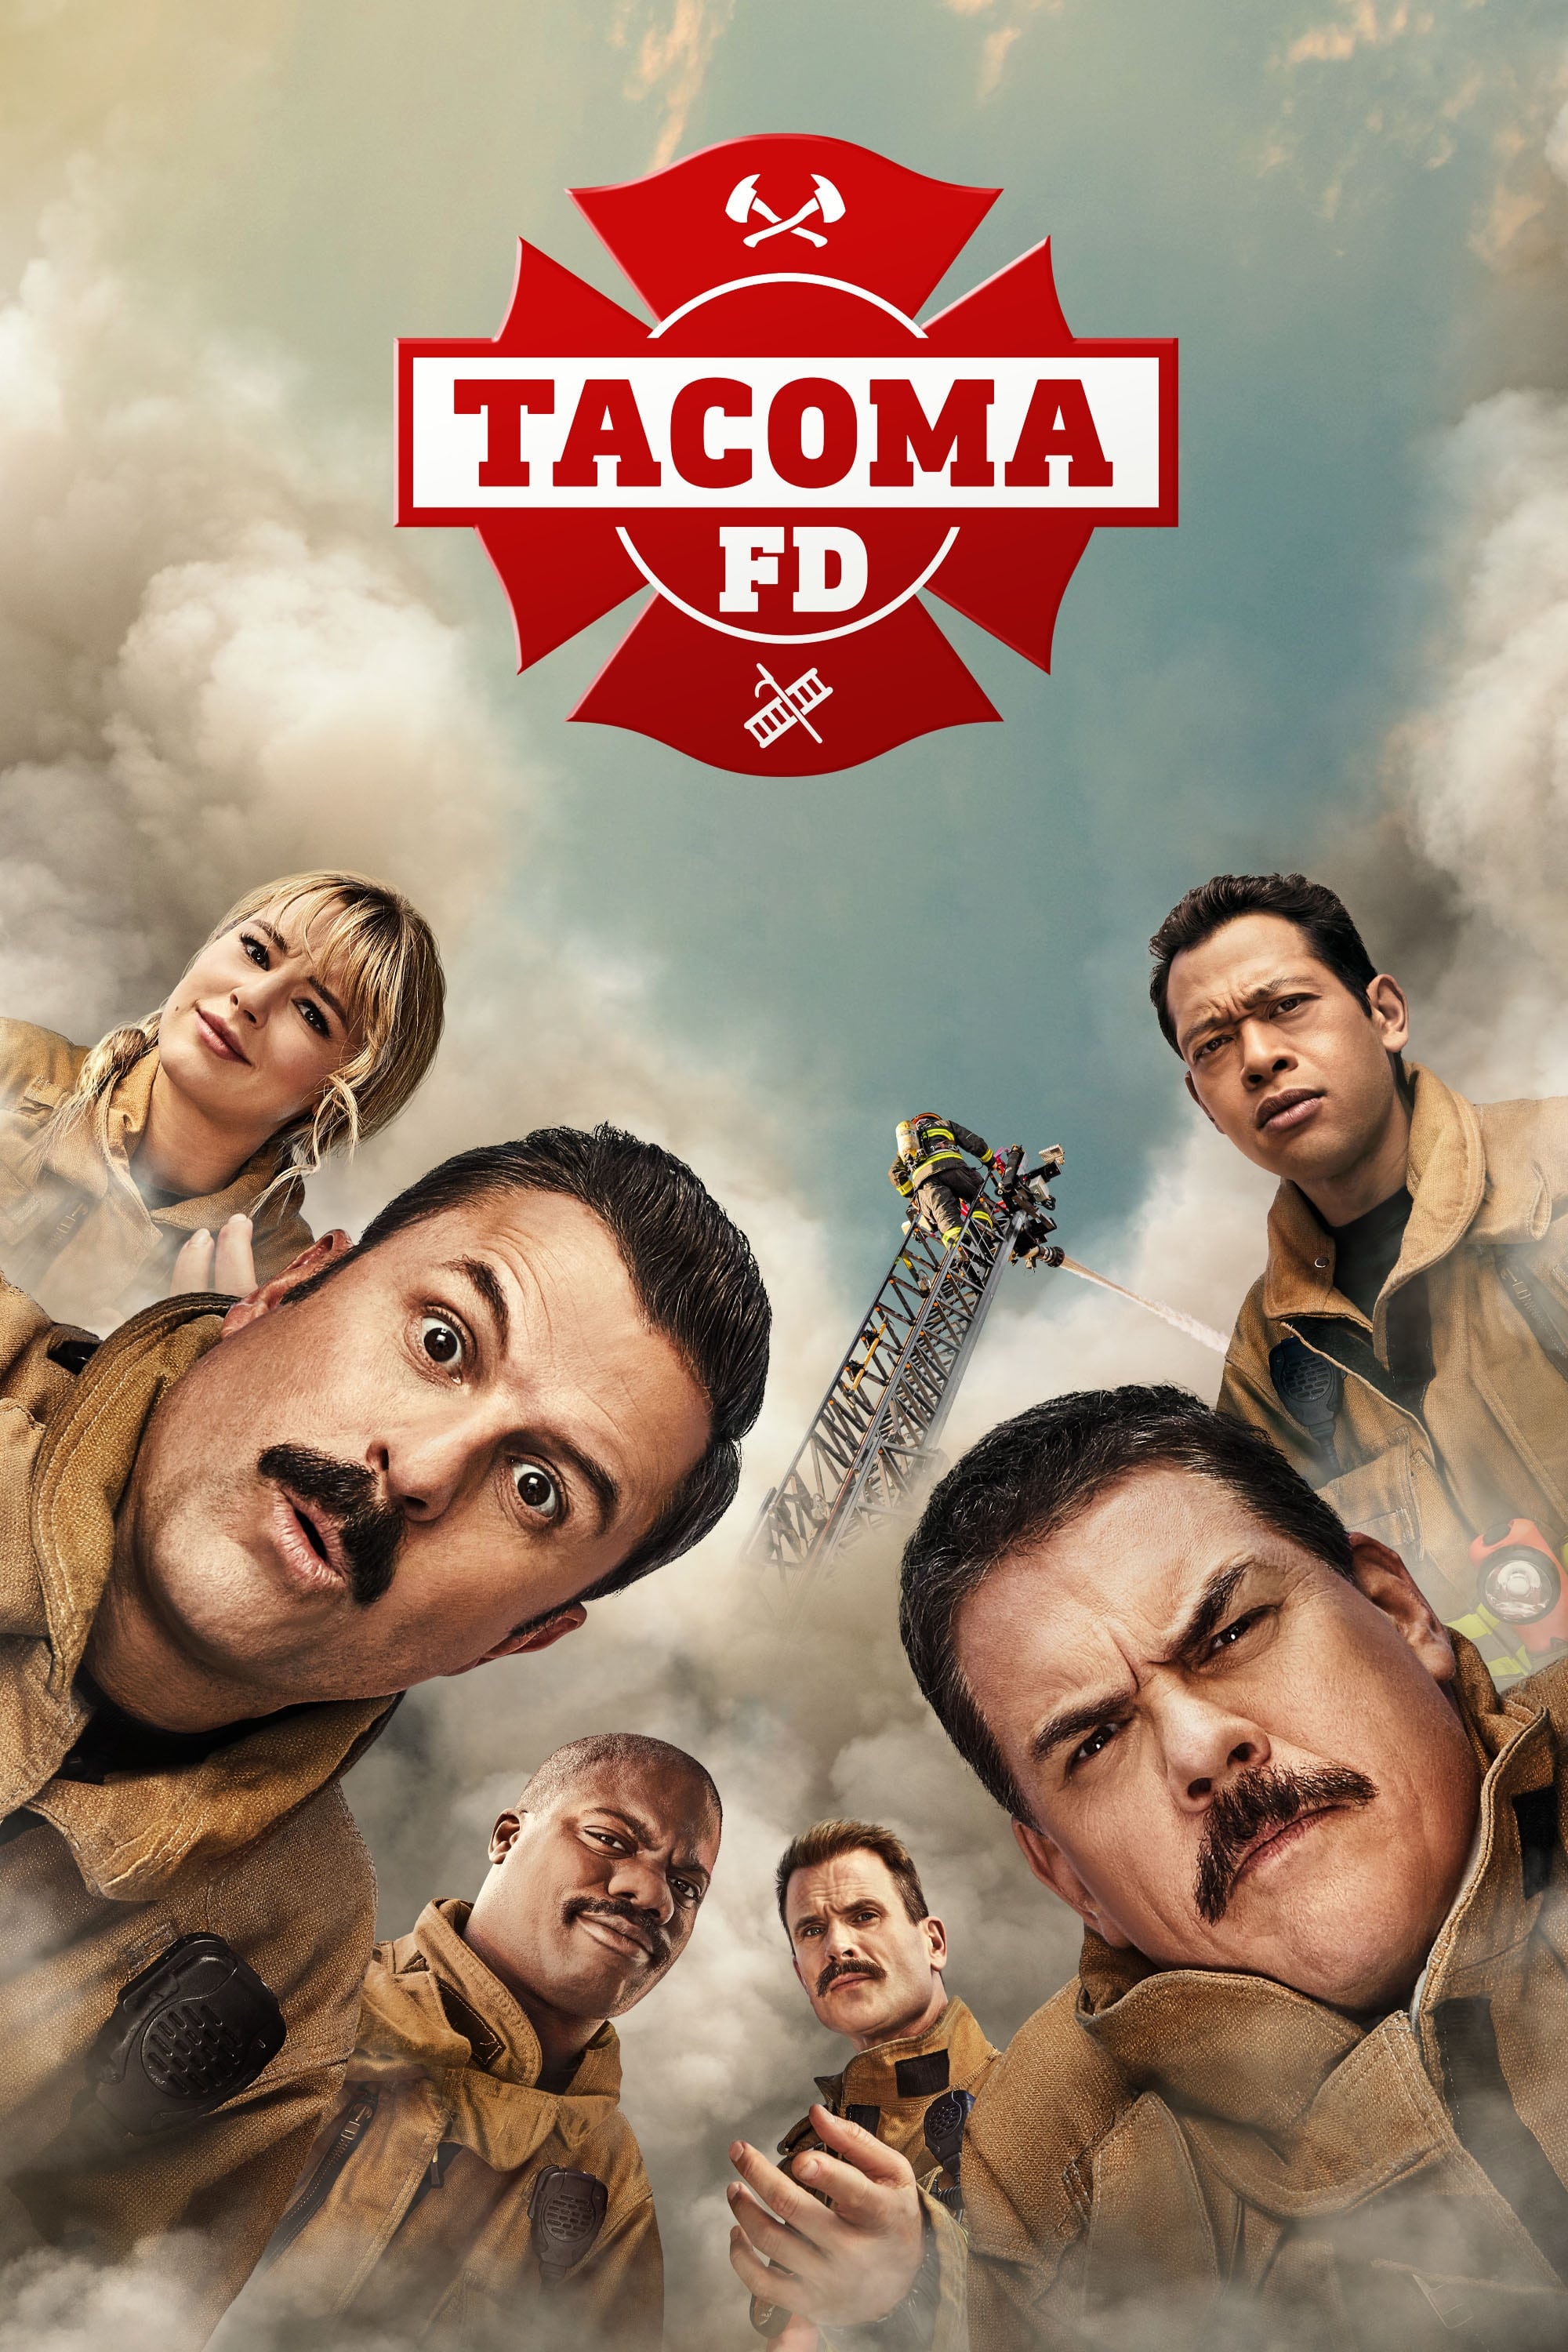 Tacoma FD TV Shows About Firefighter